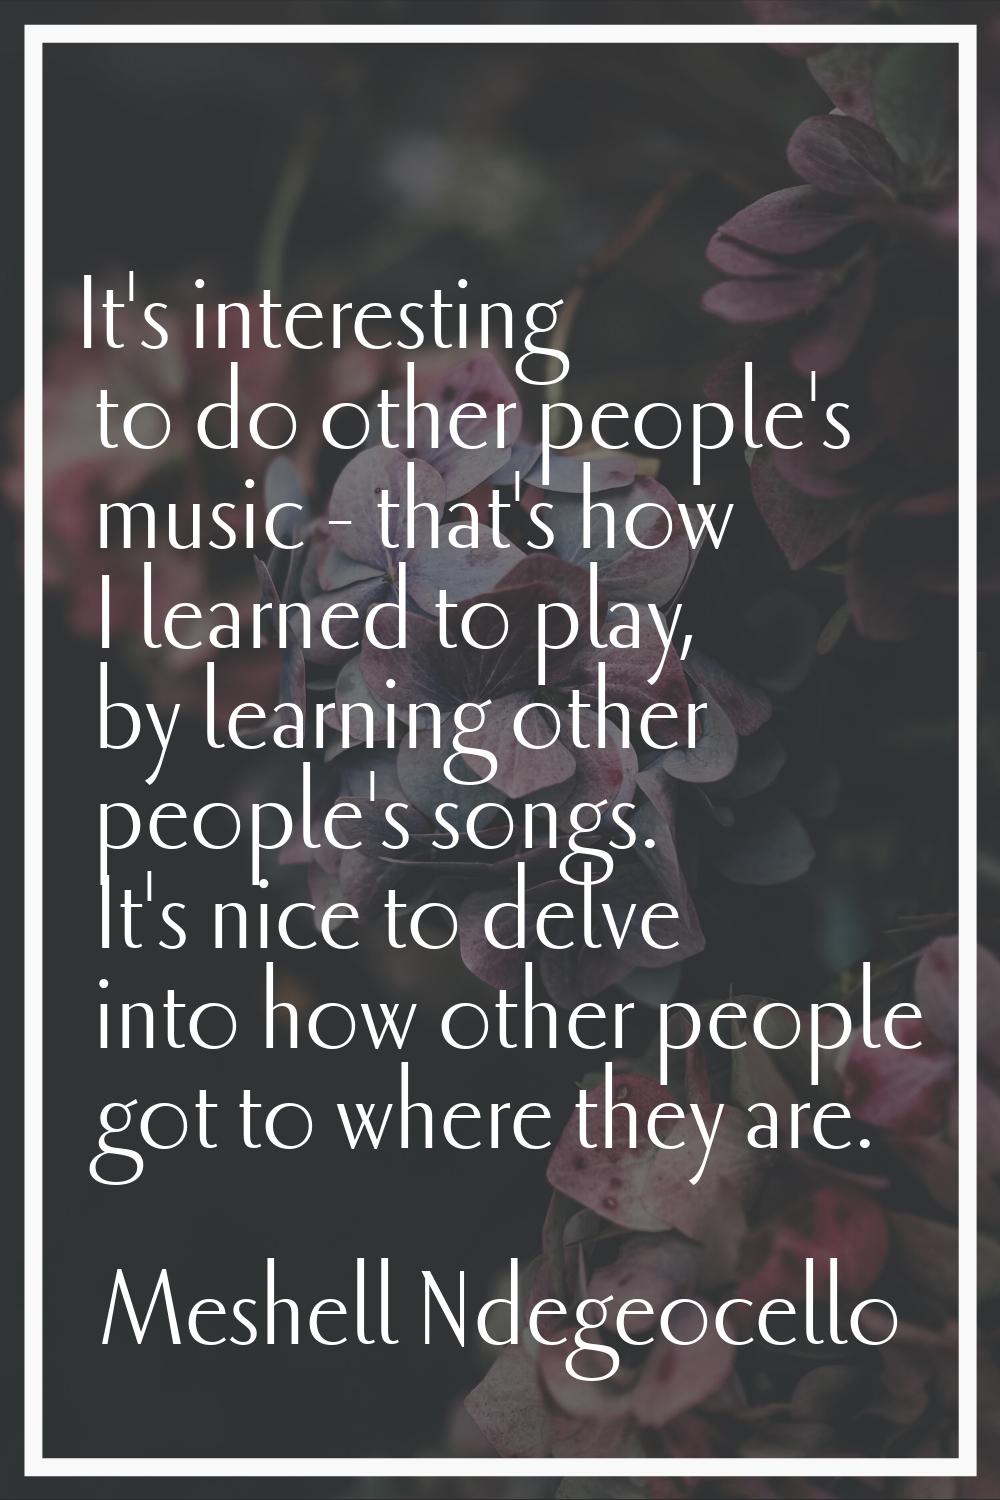 It's interesting to do other people's music - that's how I learned to play, by learning other peopl